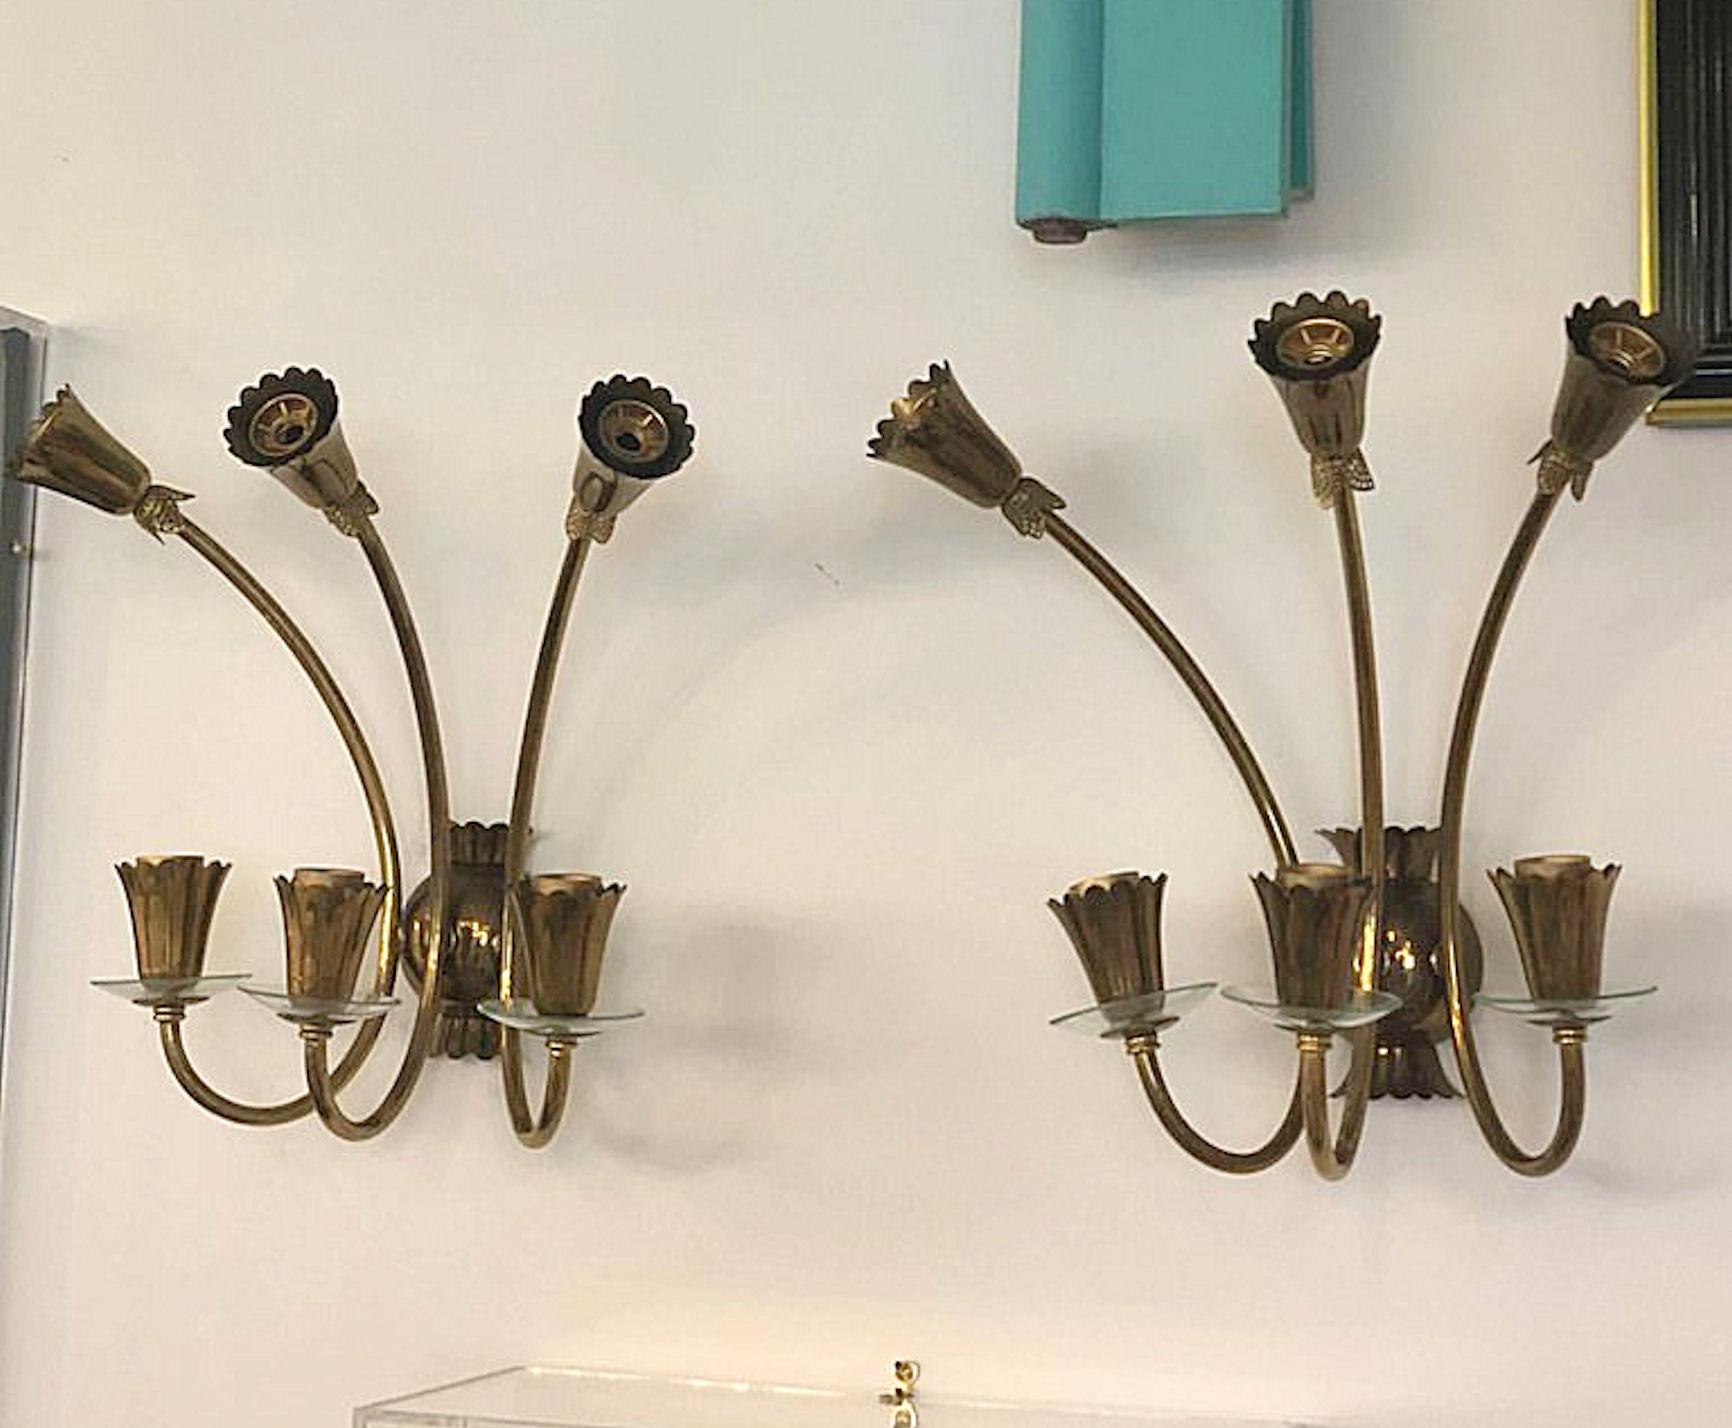 Pair of six-light Mid-Century Modern, brass with clear glass bobeches Italian wall sconces, in the style of Stilnovo, 1960s.
Pure Gio Ponti for Stilnovo Italian mid-century style, for this pair of vintage elegant and simple wall lights.
They have